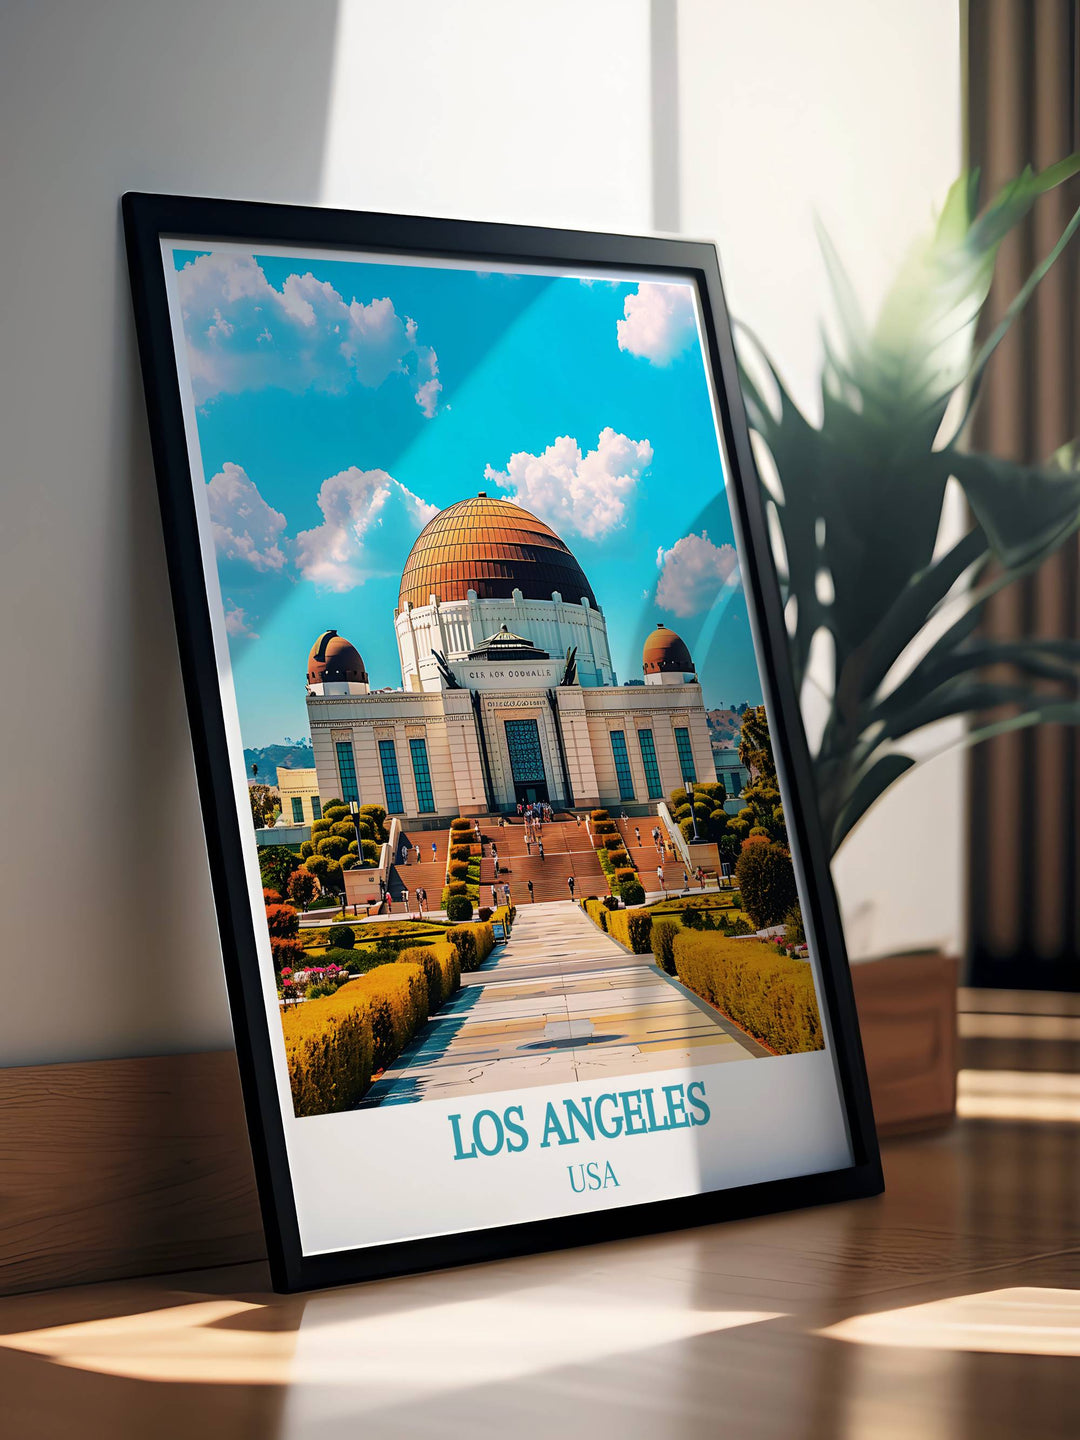 Custom print of Los Angeles, focusing on its diverse architecture and vibrant urban life.